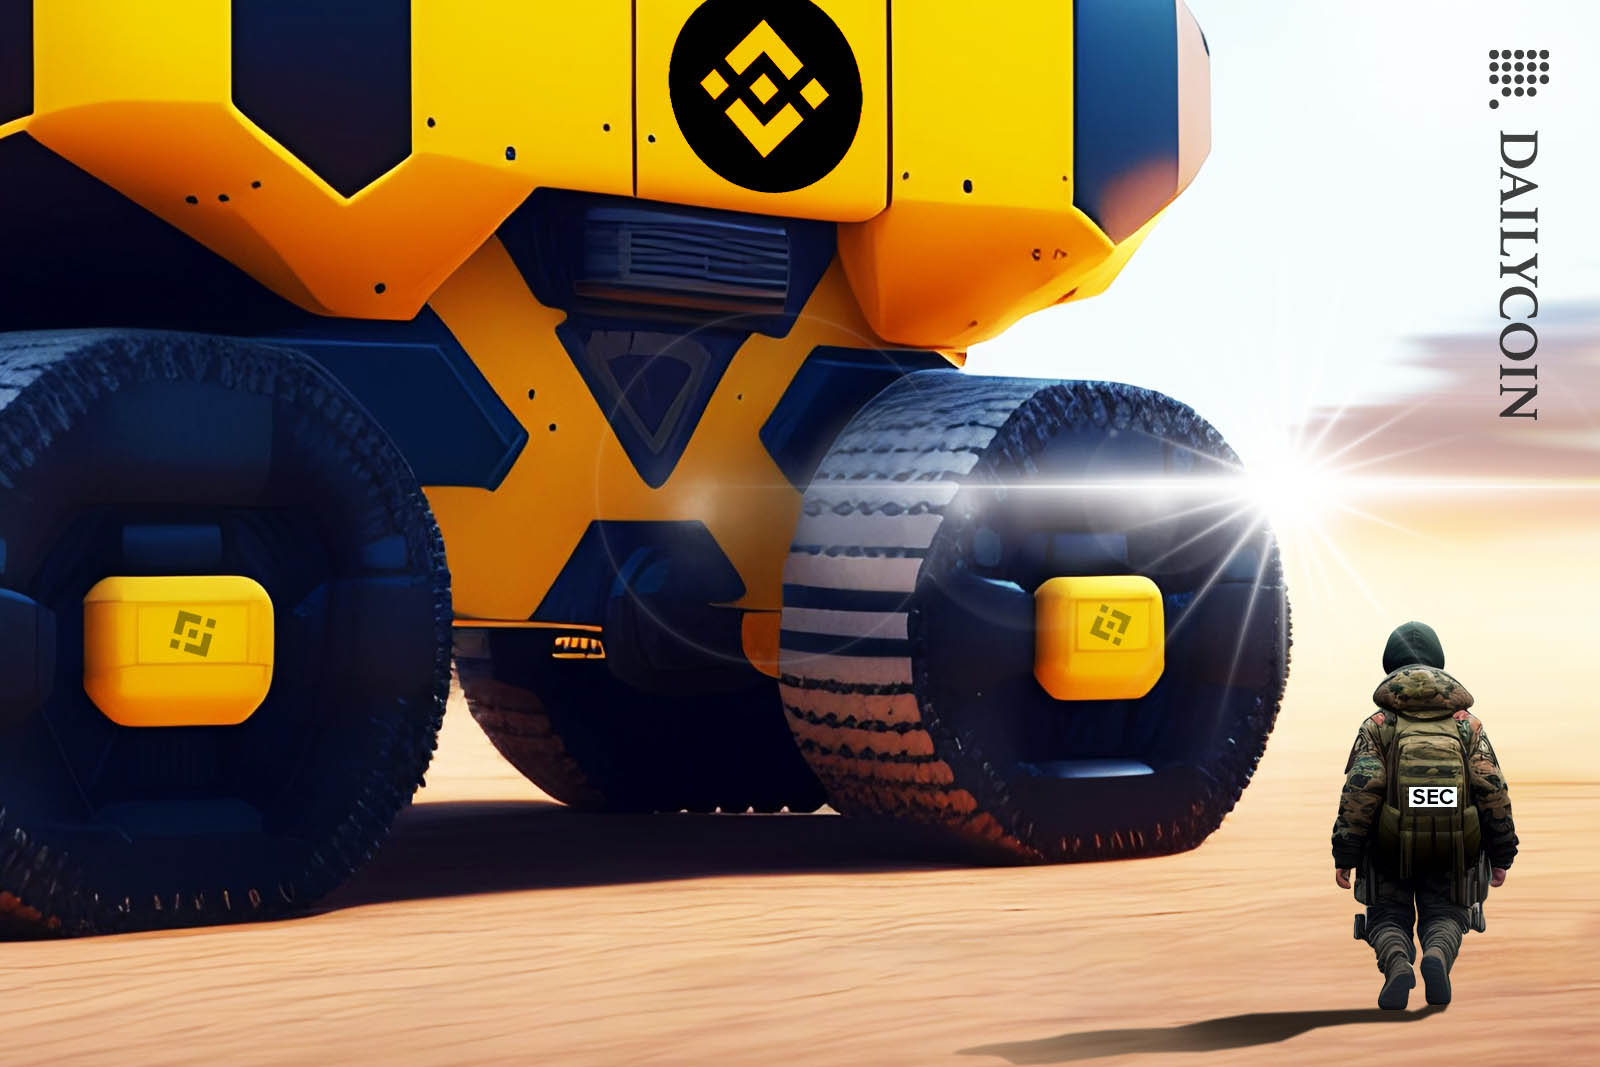 A tiny soldier with a SEC badge approaching a huge futurisctic Binance vehicle.